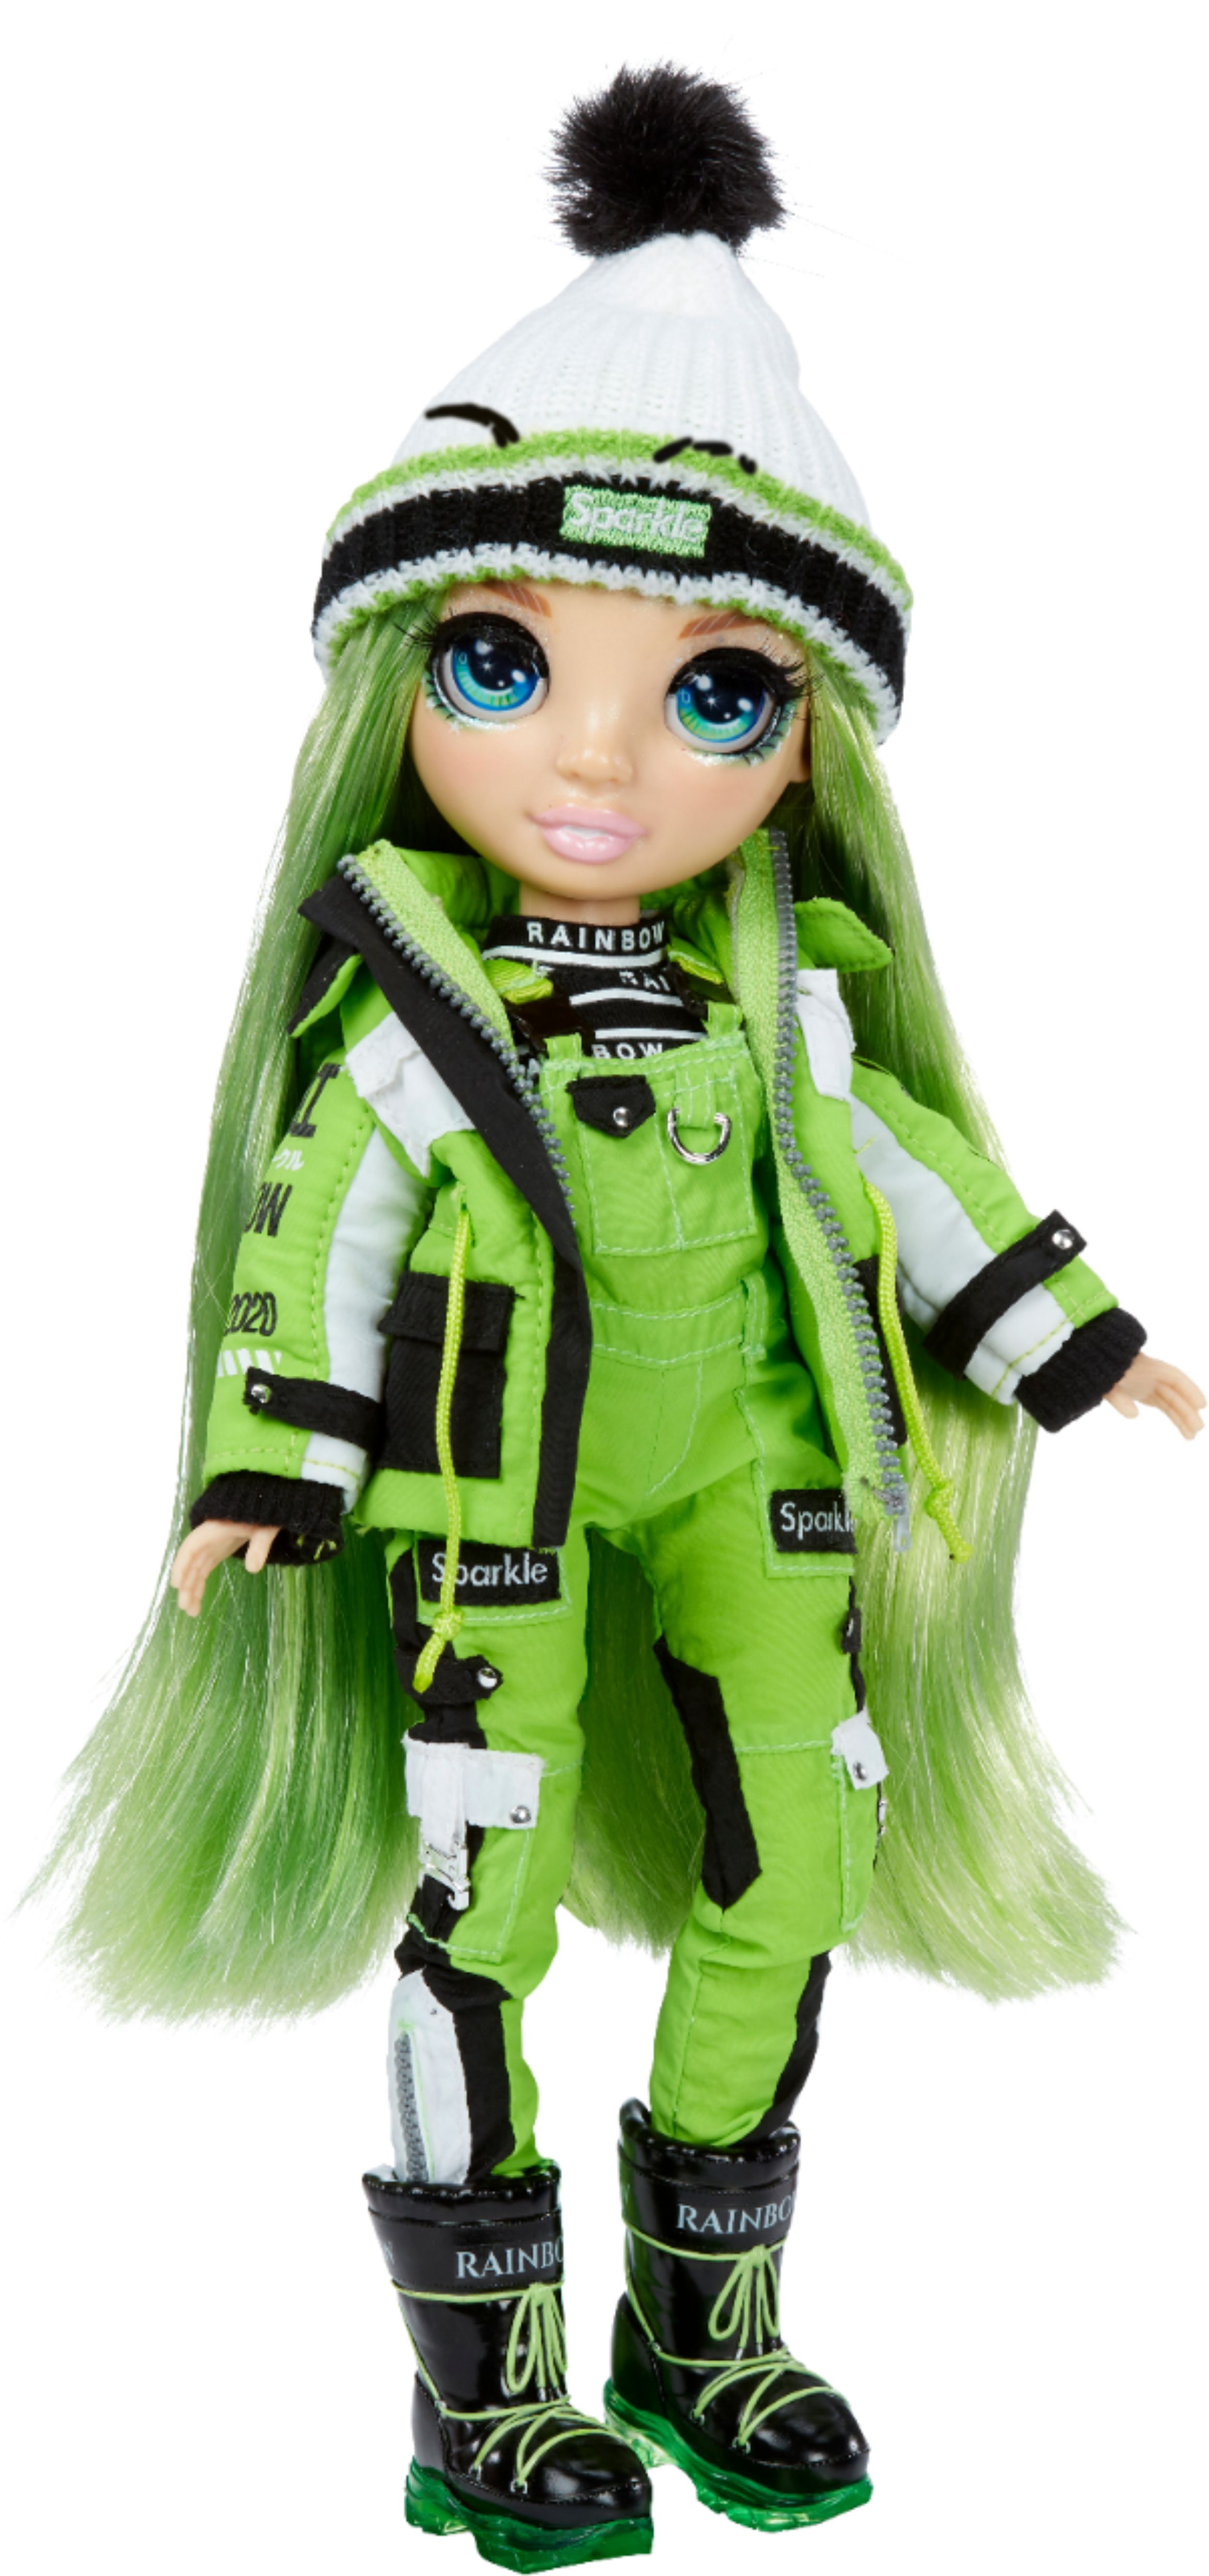 Rainbow High Winter Break Violet Willow Doll Review!